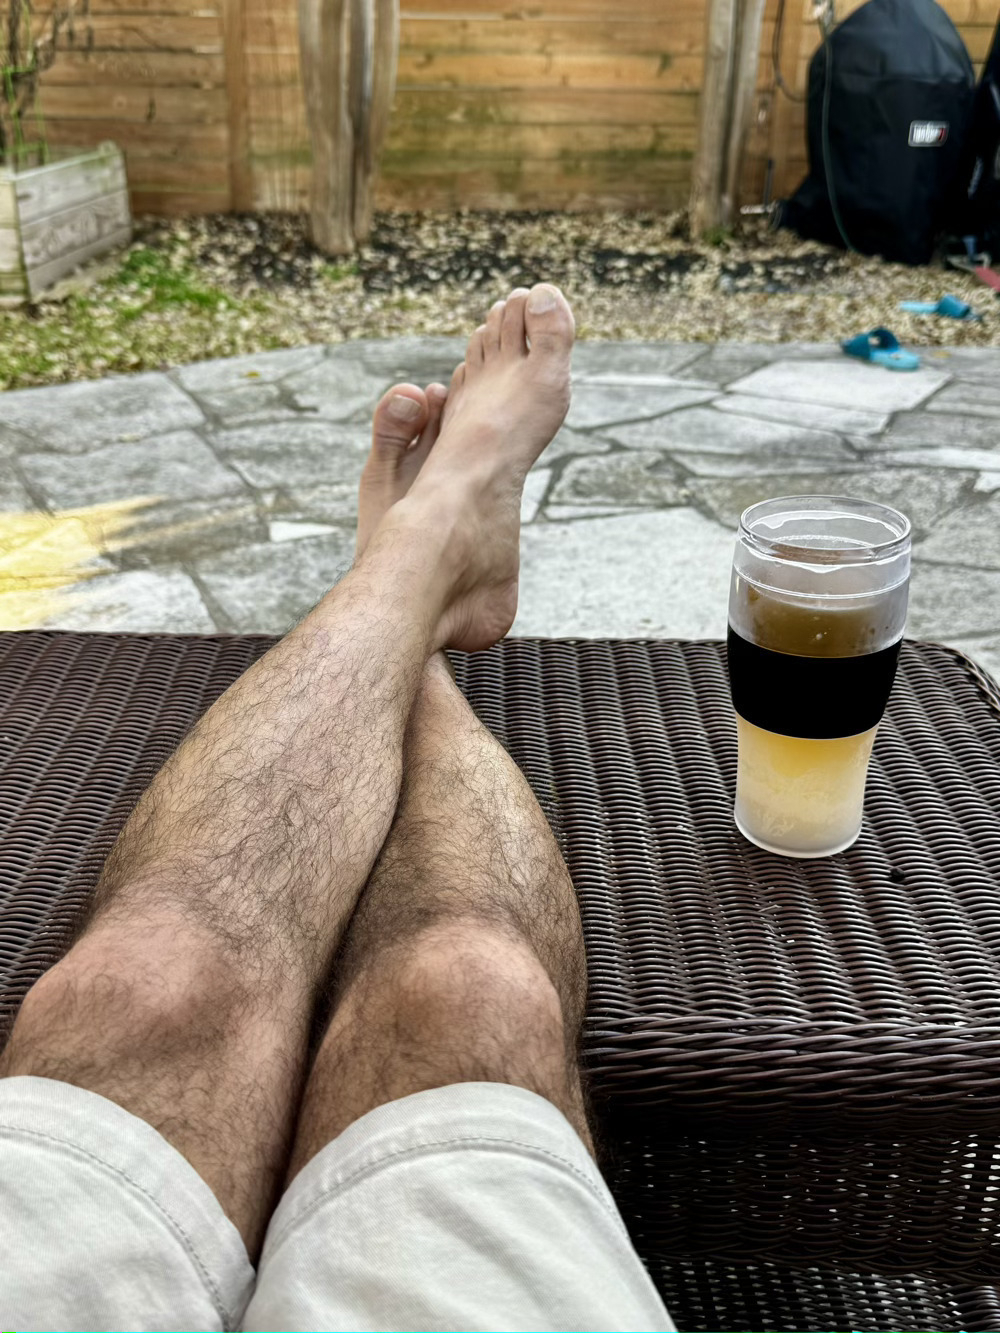 Person&rsquo;s legs stretched out on a wicker surface, with a glass of beer nearby, in a garden setting.